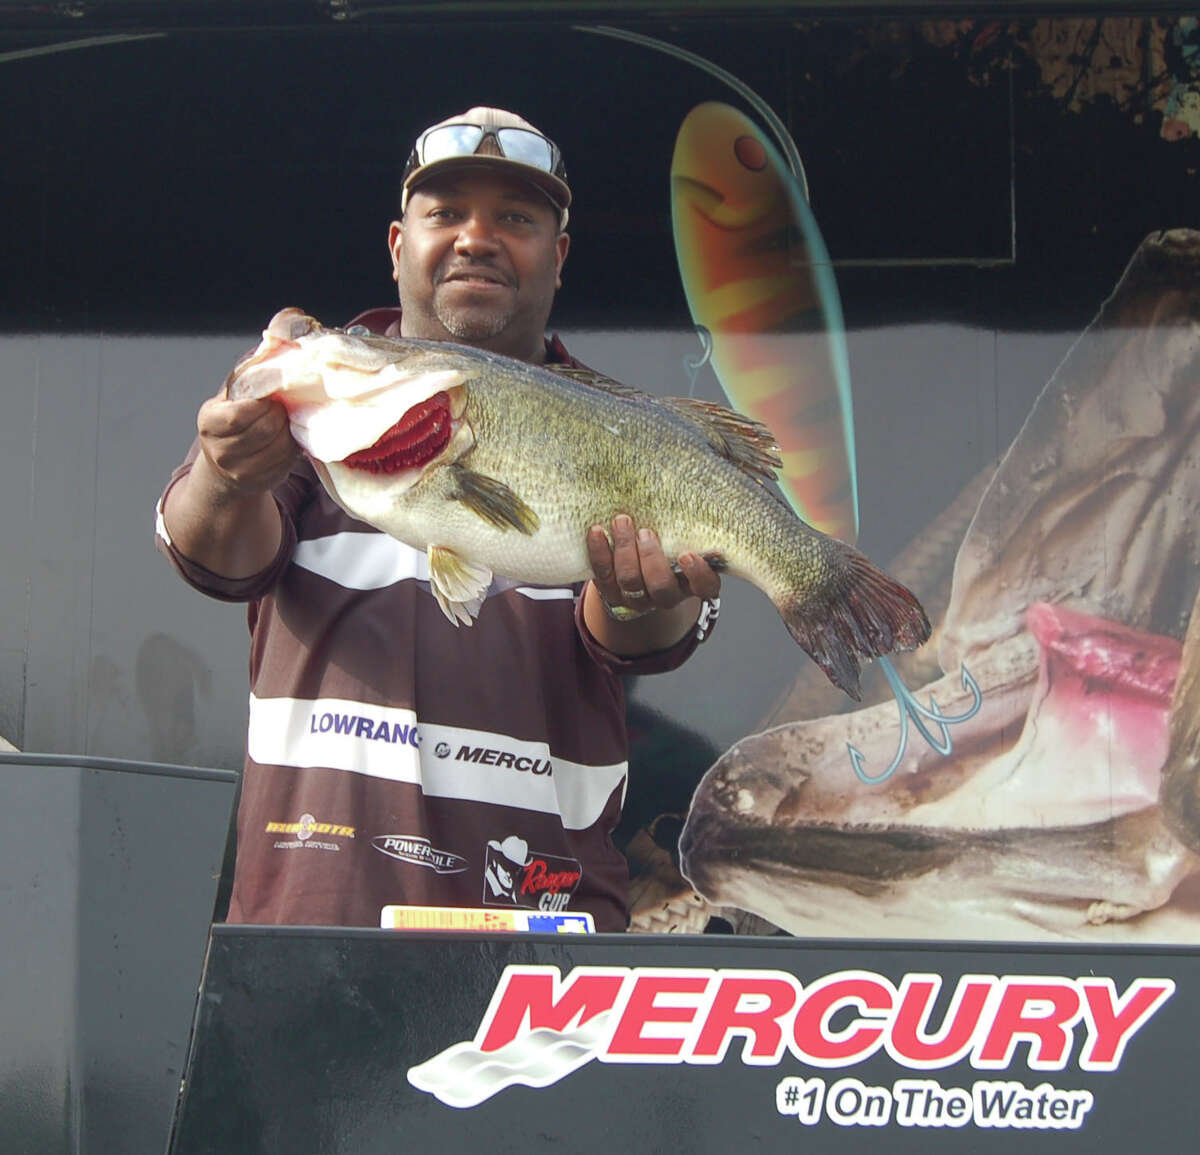 Gil Leger of Lake Charles, LA took over the lead of the Big Bass Splash Saturday with this 11.48 lb lunker Photo by Patty Lenderman, Lakecaster